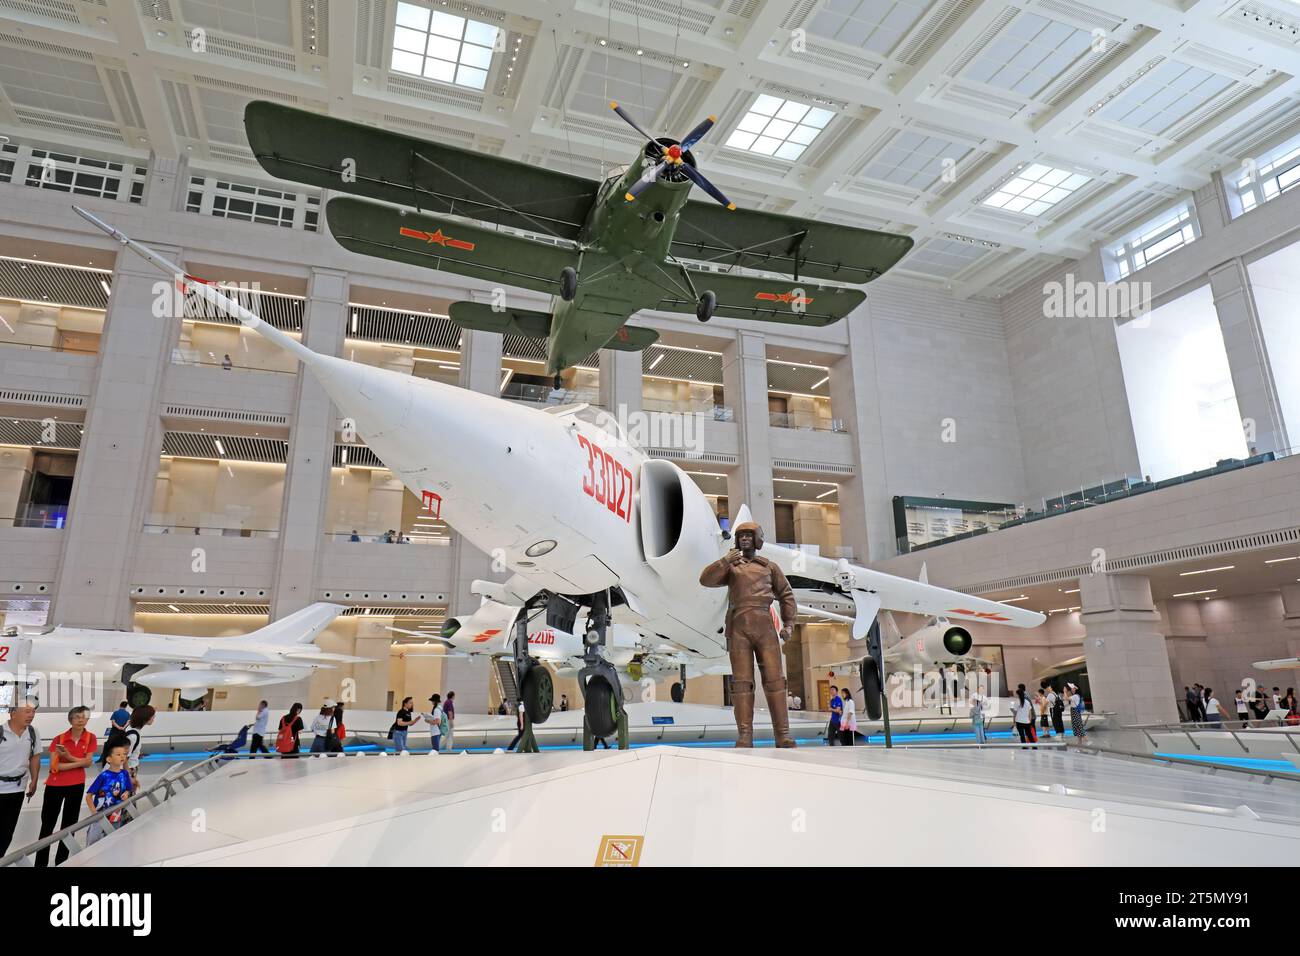 Beijing - June 28, 2019: Chinese-made fighter aircraft, Chinese People's Revolutionary Military Museum, Beijing, China Stock Photo